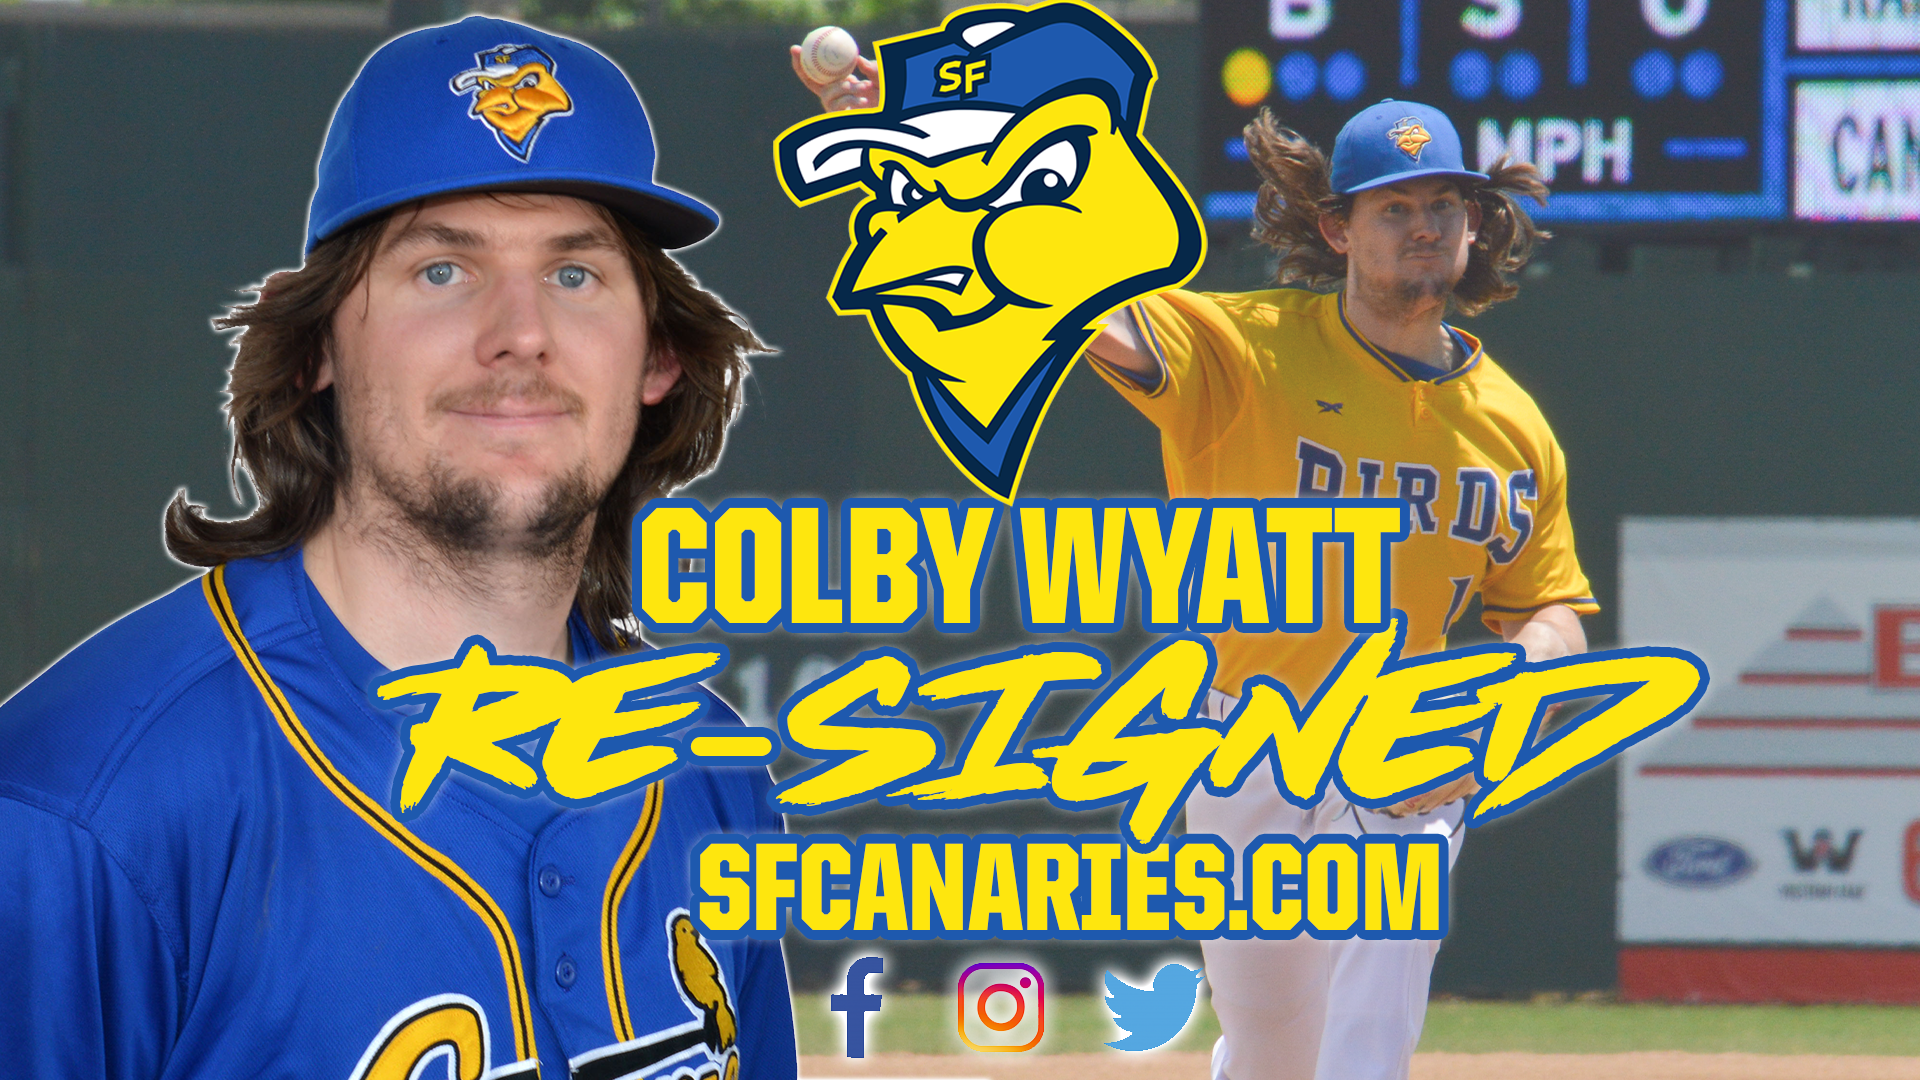 Canaries Reinforce Relief, Re-Sign Colby Wyatt